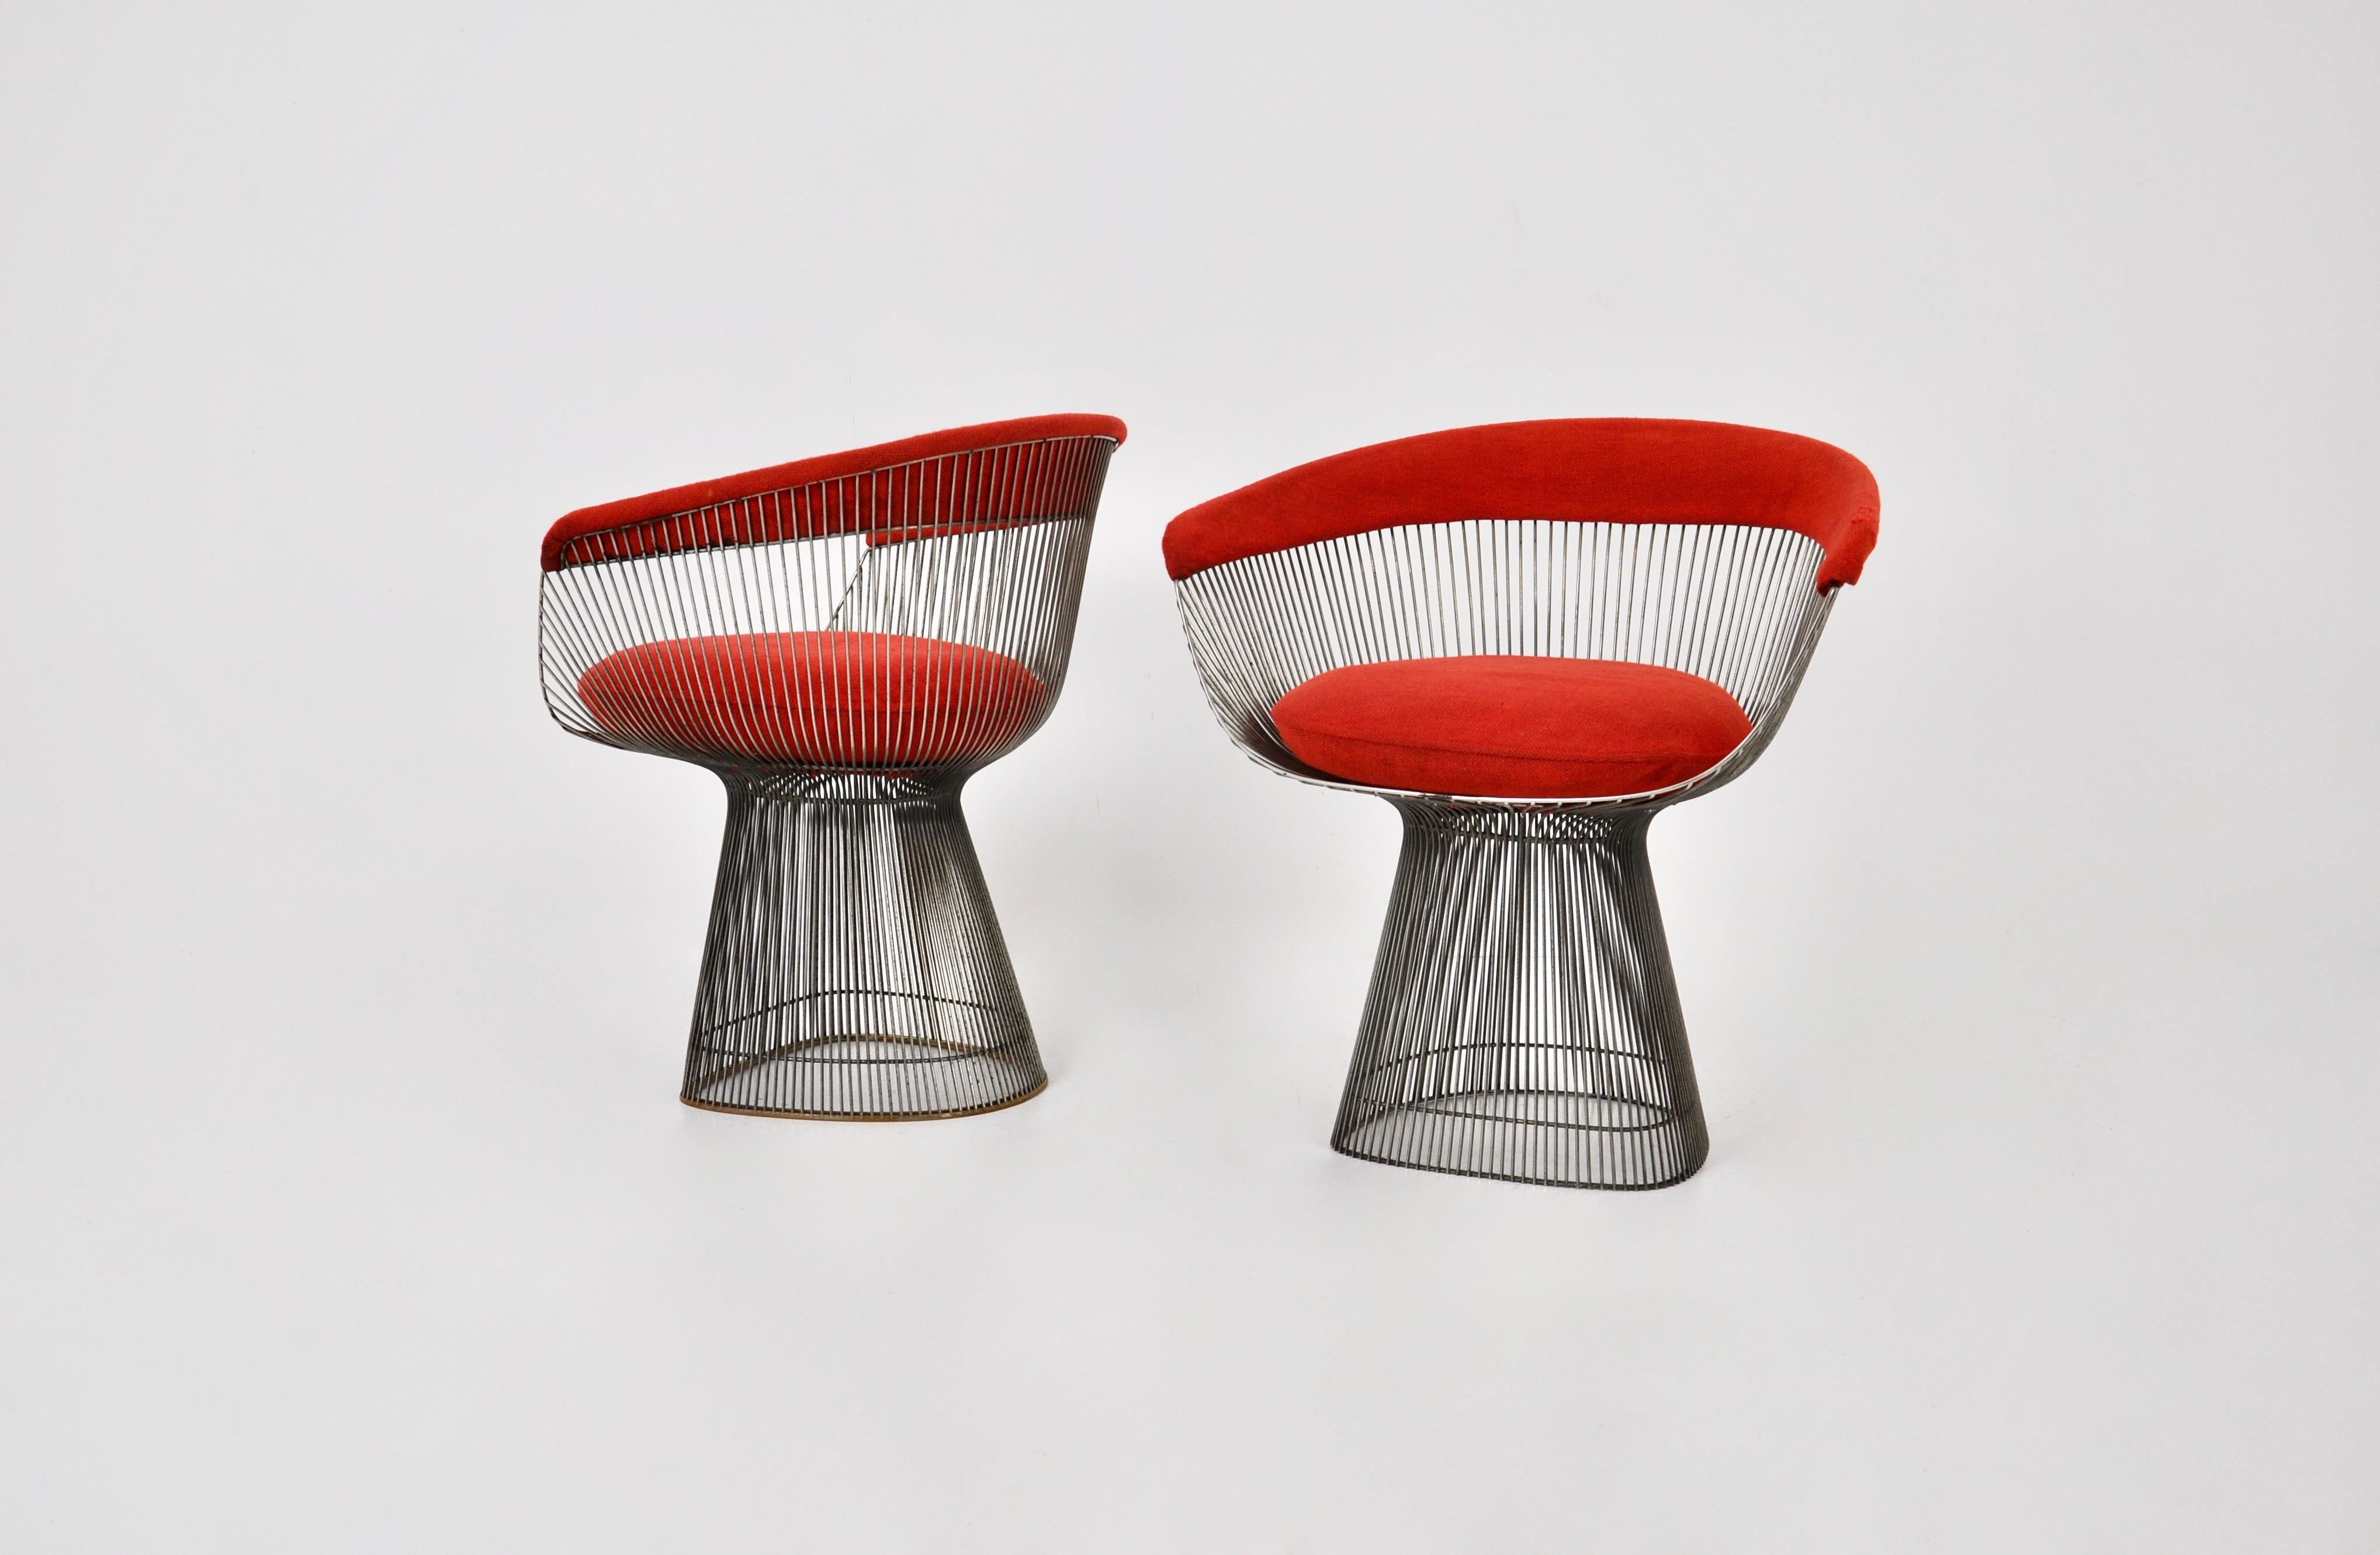 Armchair by Warren Platner in metal and with original red fabric. Knoll edition. Seat height: 47 cm. Wear due to time and age of the armchair.